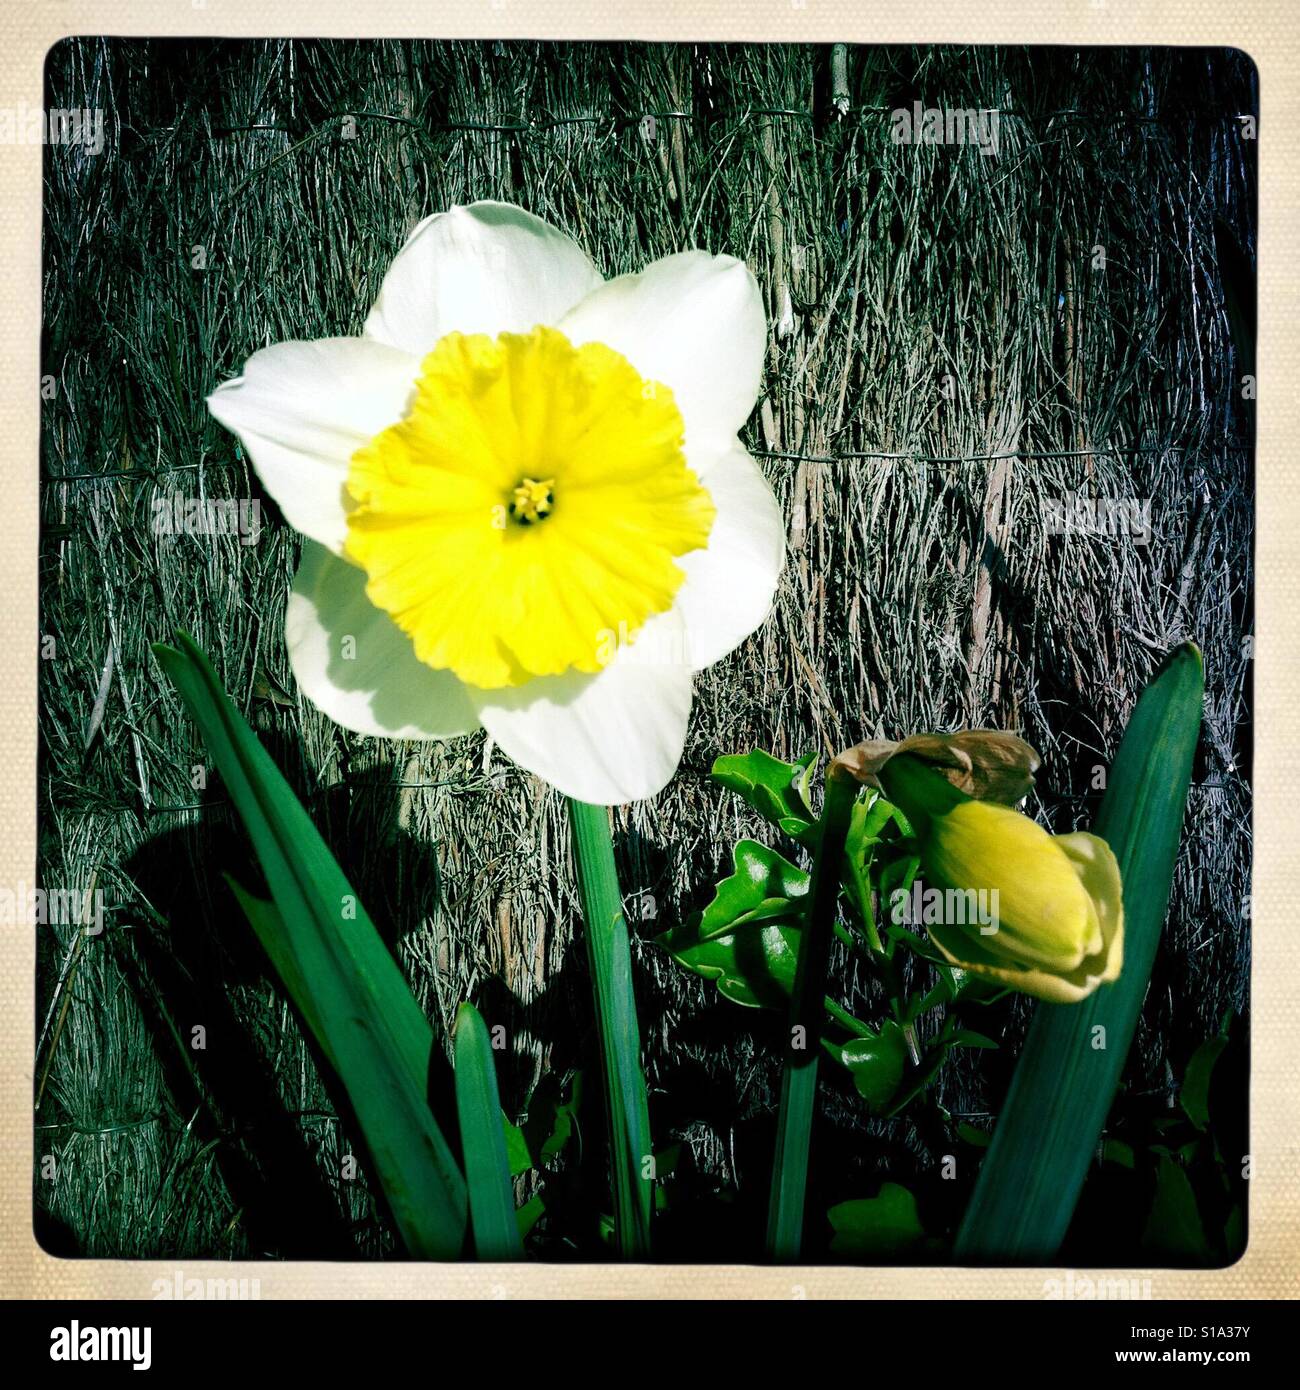 Narcissus flower and bulb in Barcelona Stock Photo